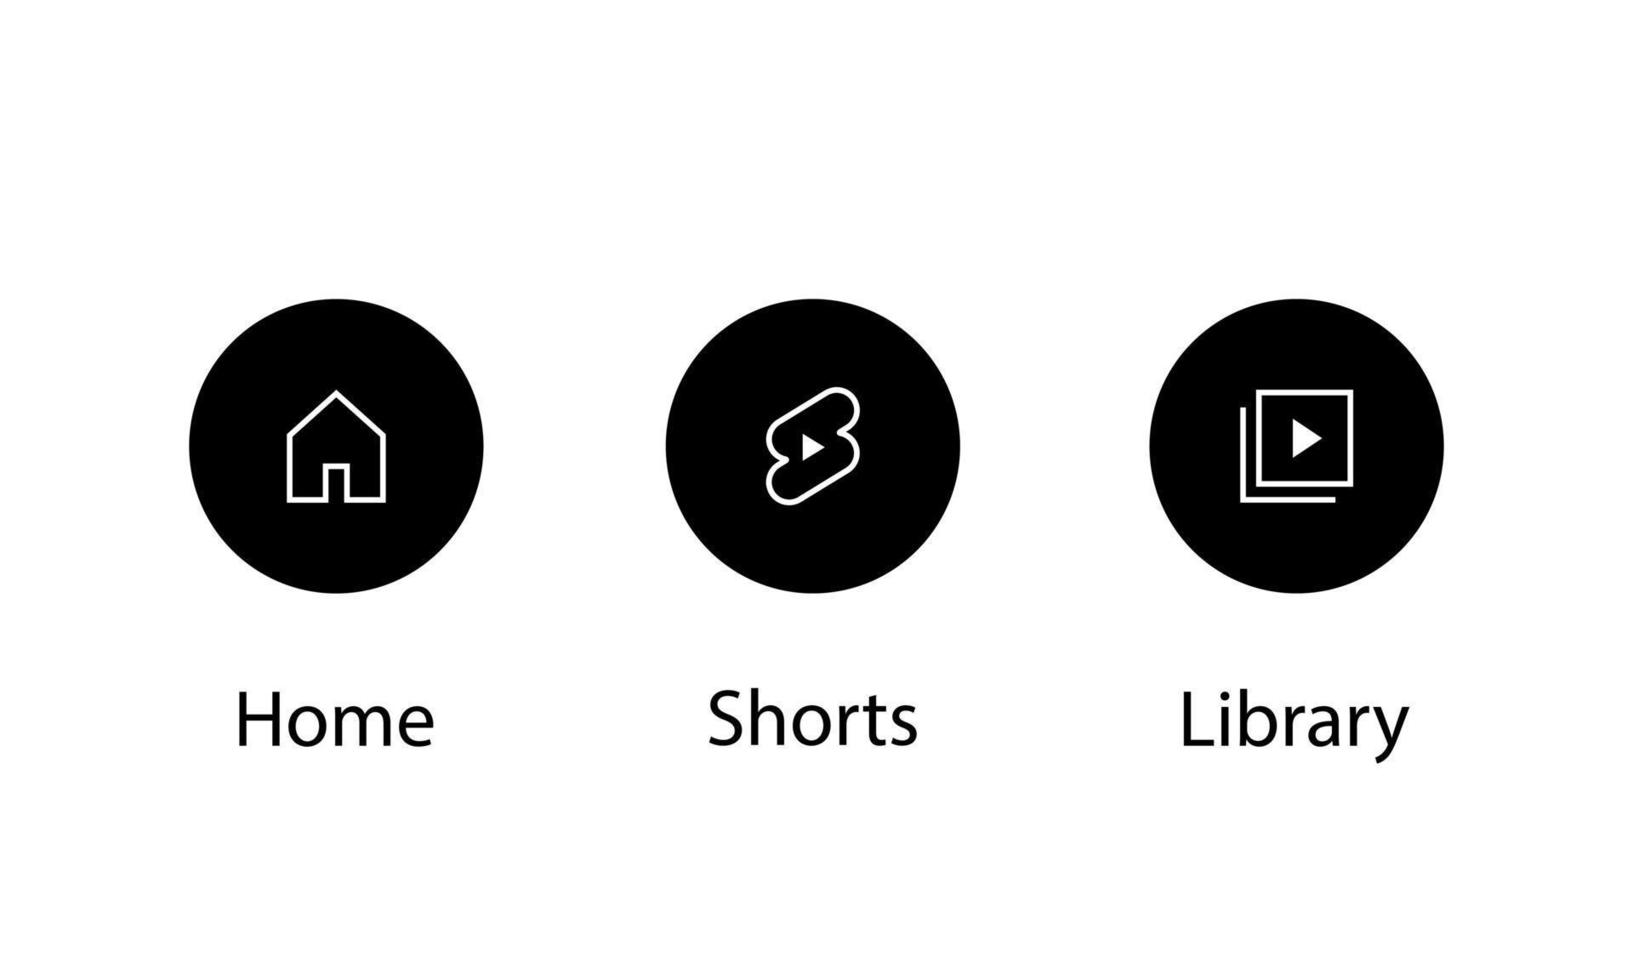 Home, Shorts, and Library Button Icon Vector in Circle Shape